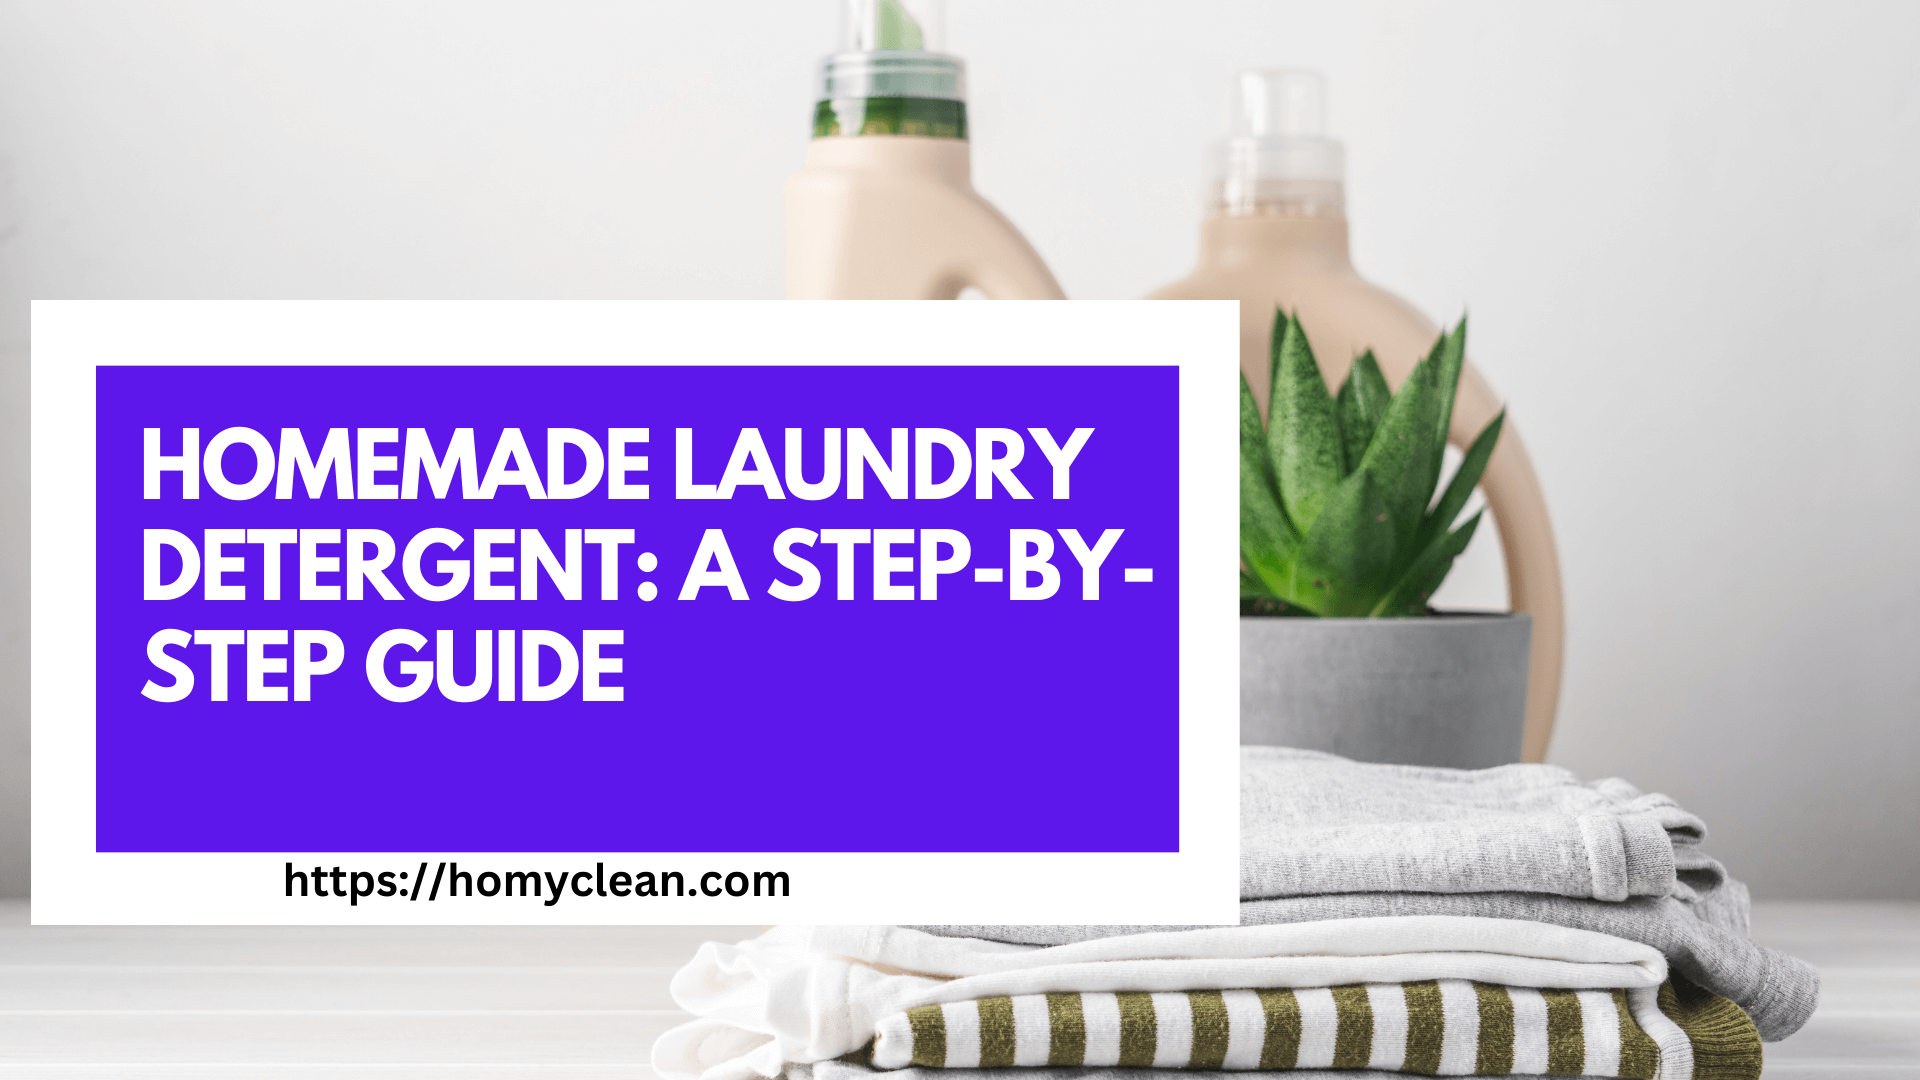 How to Make Homemade Laundry Detergent: A Step-by-Step Guide